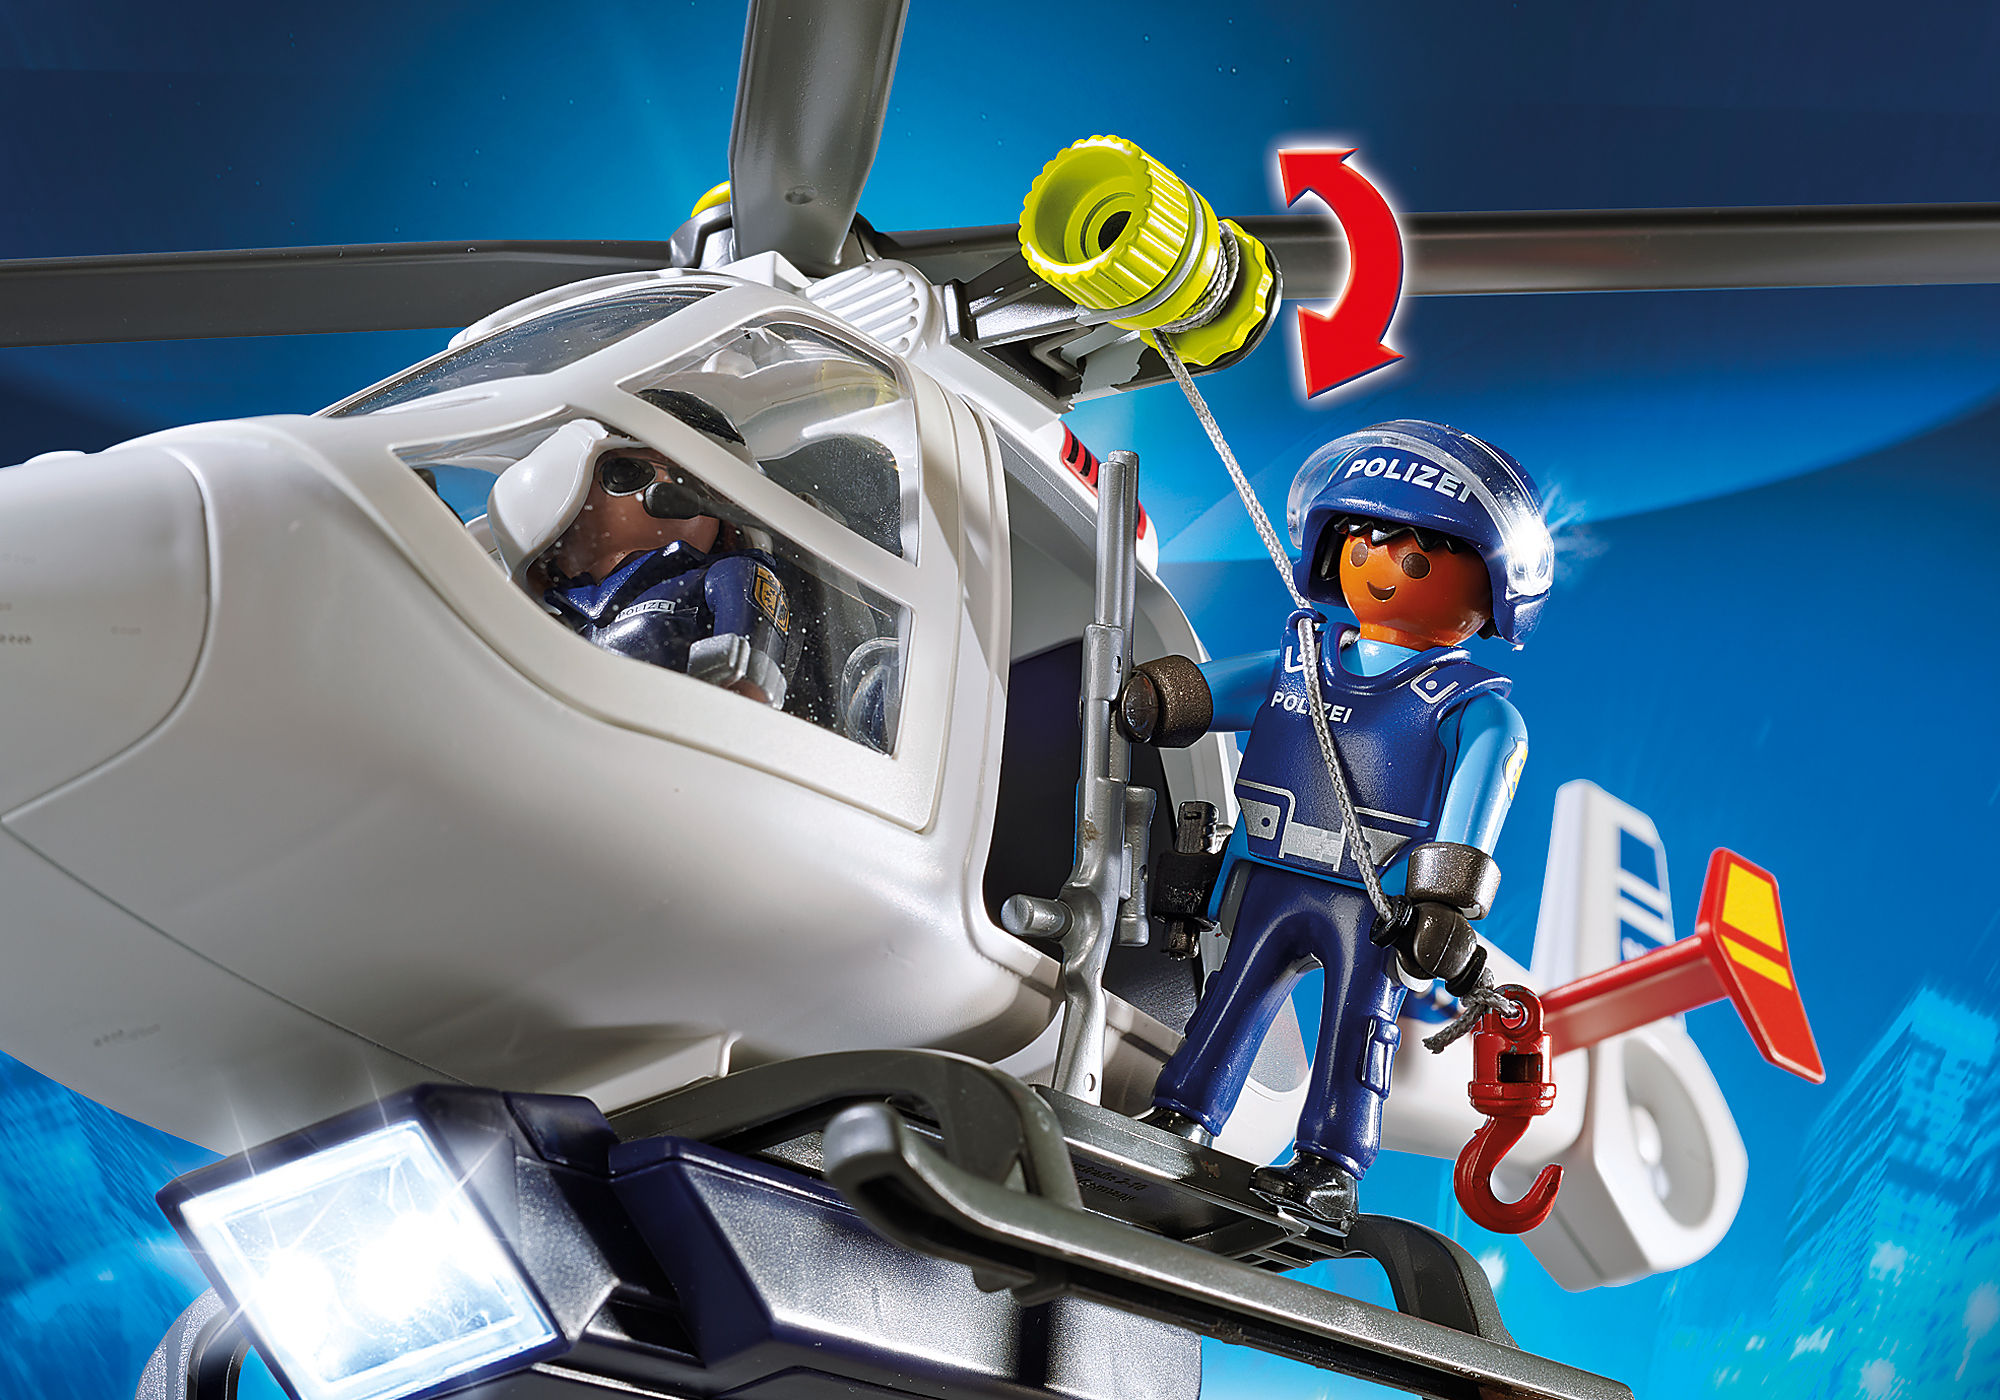 Police Helicopter LED - 6874 |